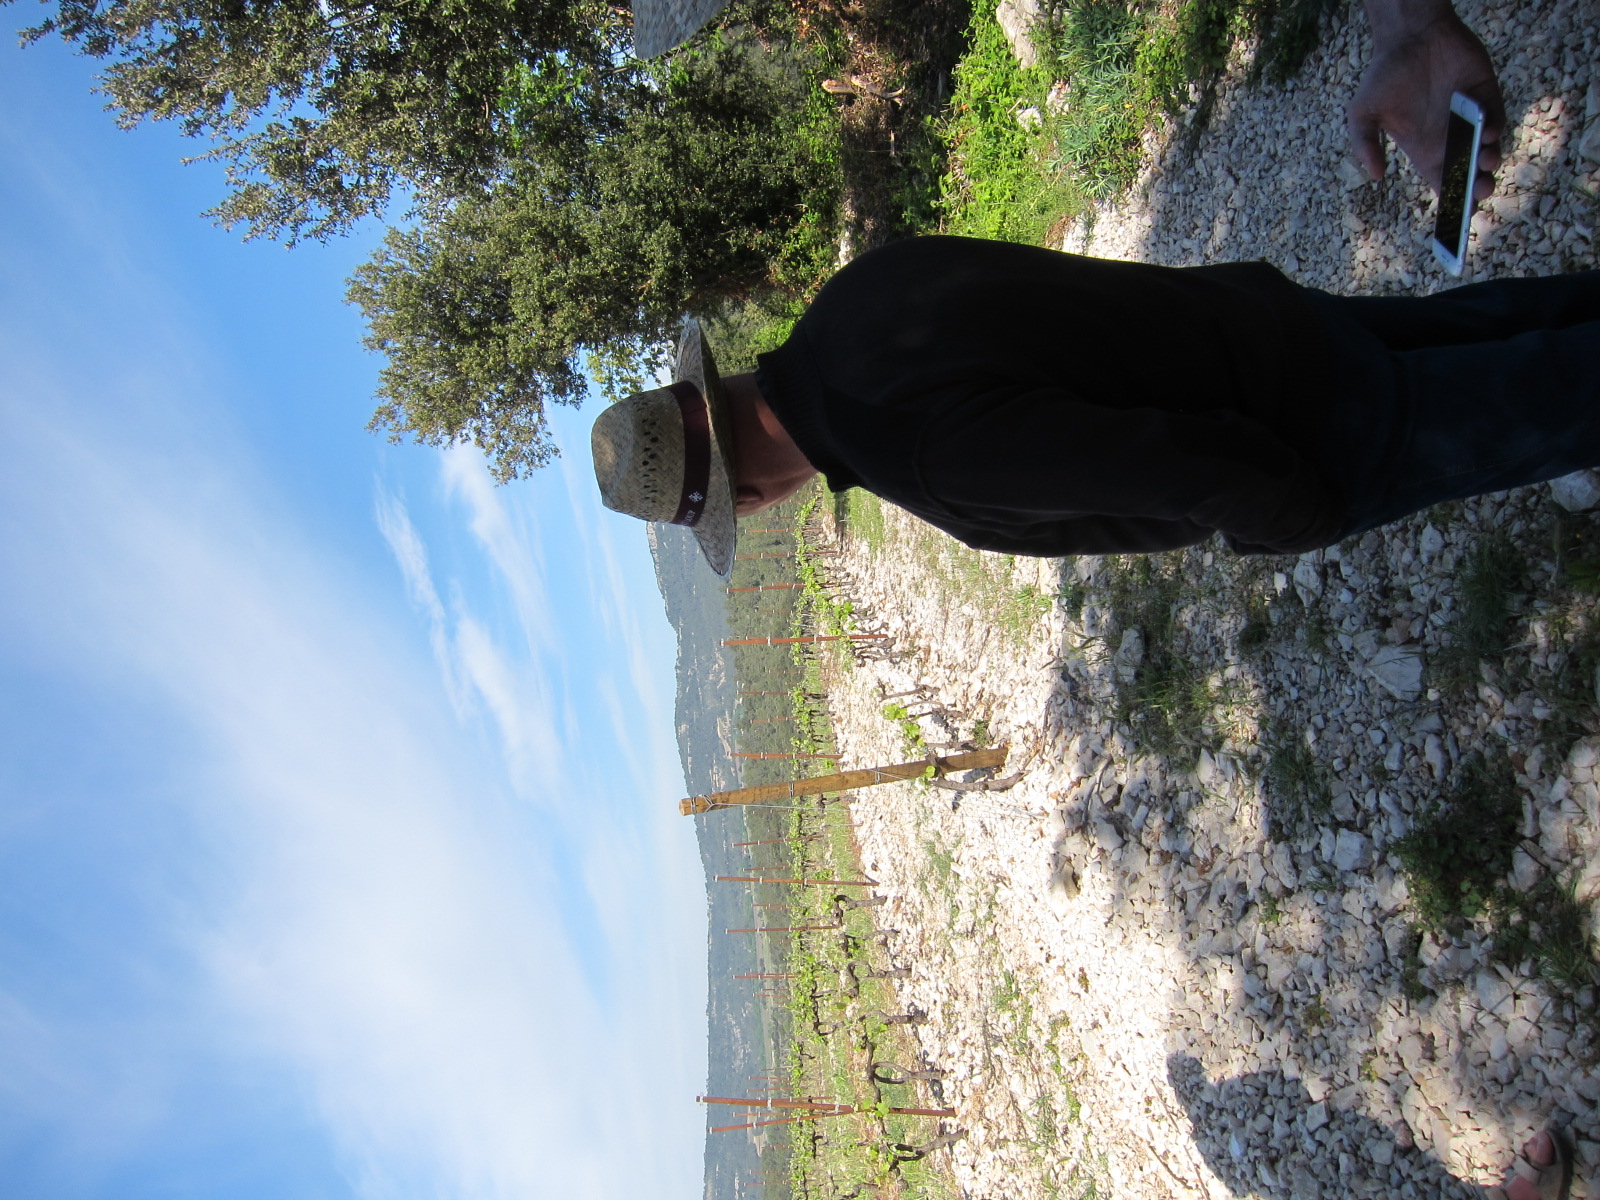 Bernard Durand looks out on his limestone filled Chateau de Lancyre vineyards in Pic Saint-Loup.